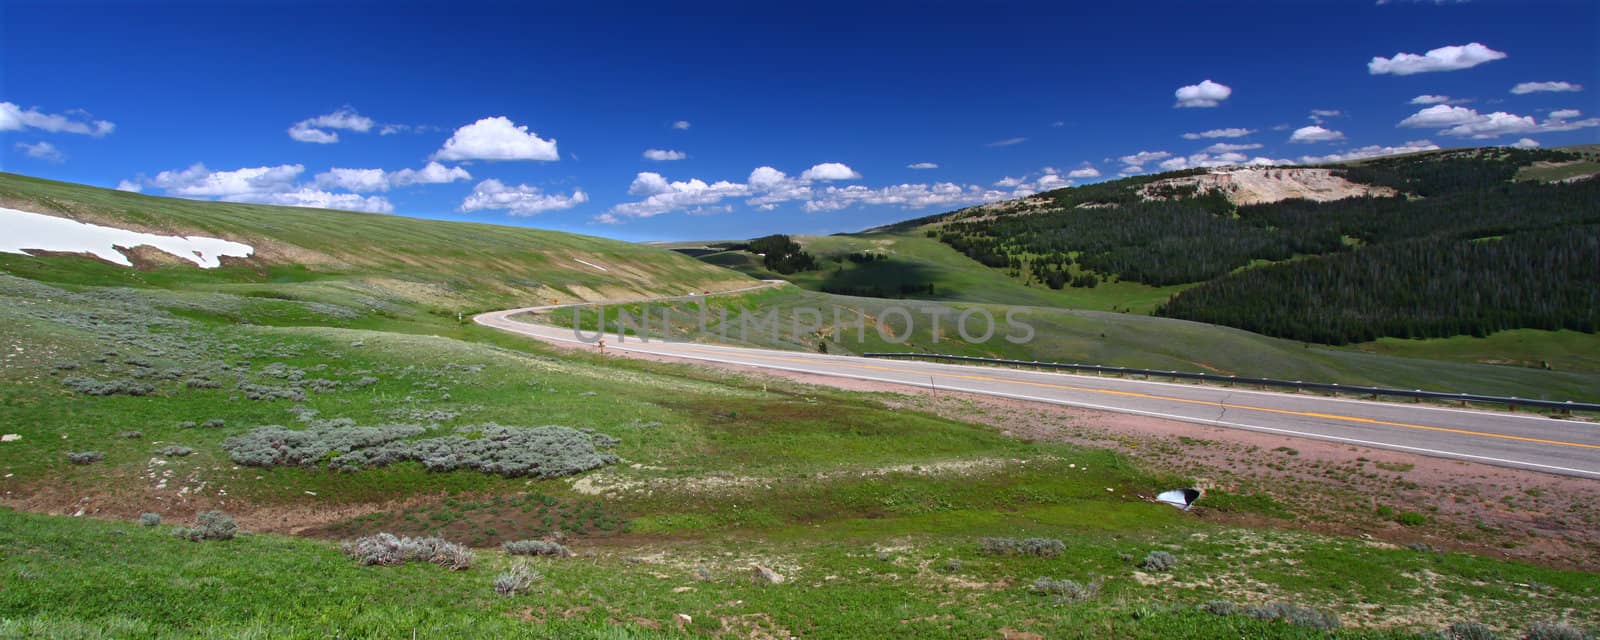 Panorama of a winding road through high elevations of the Bighorn National Forest in Wyoming.